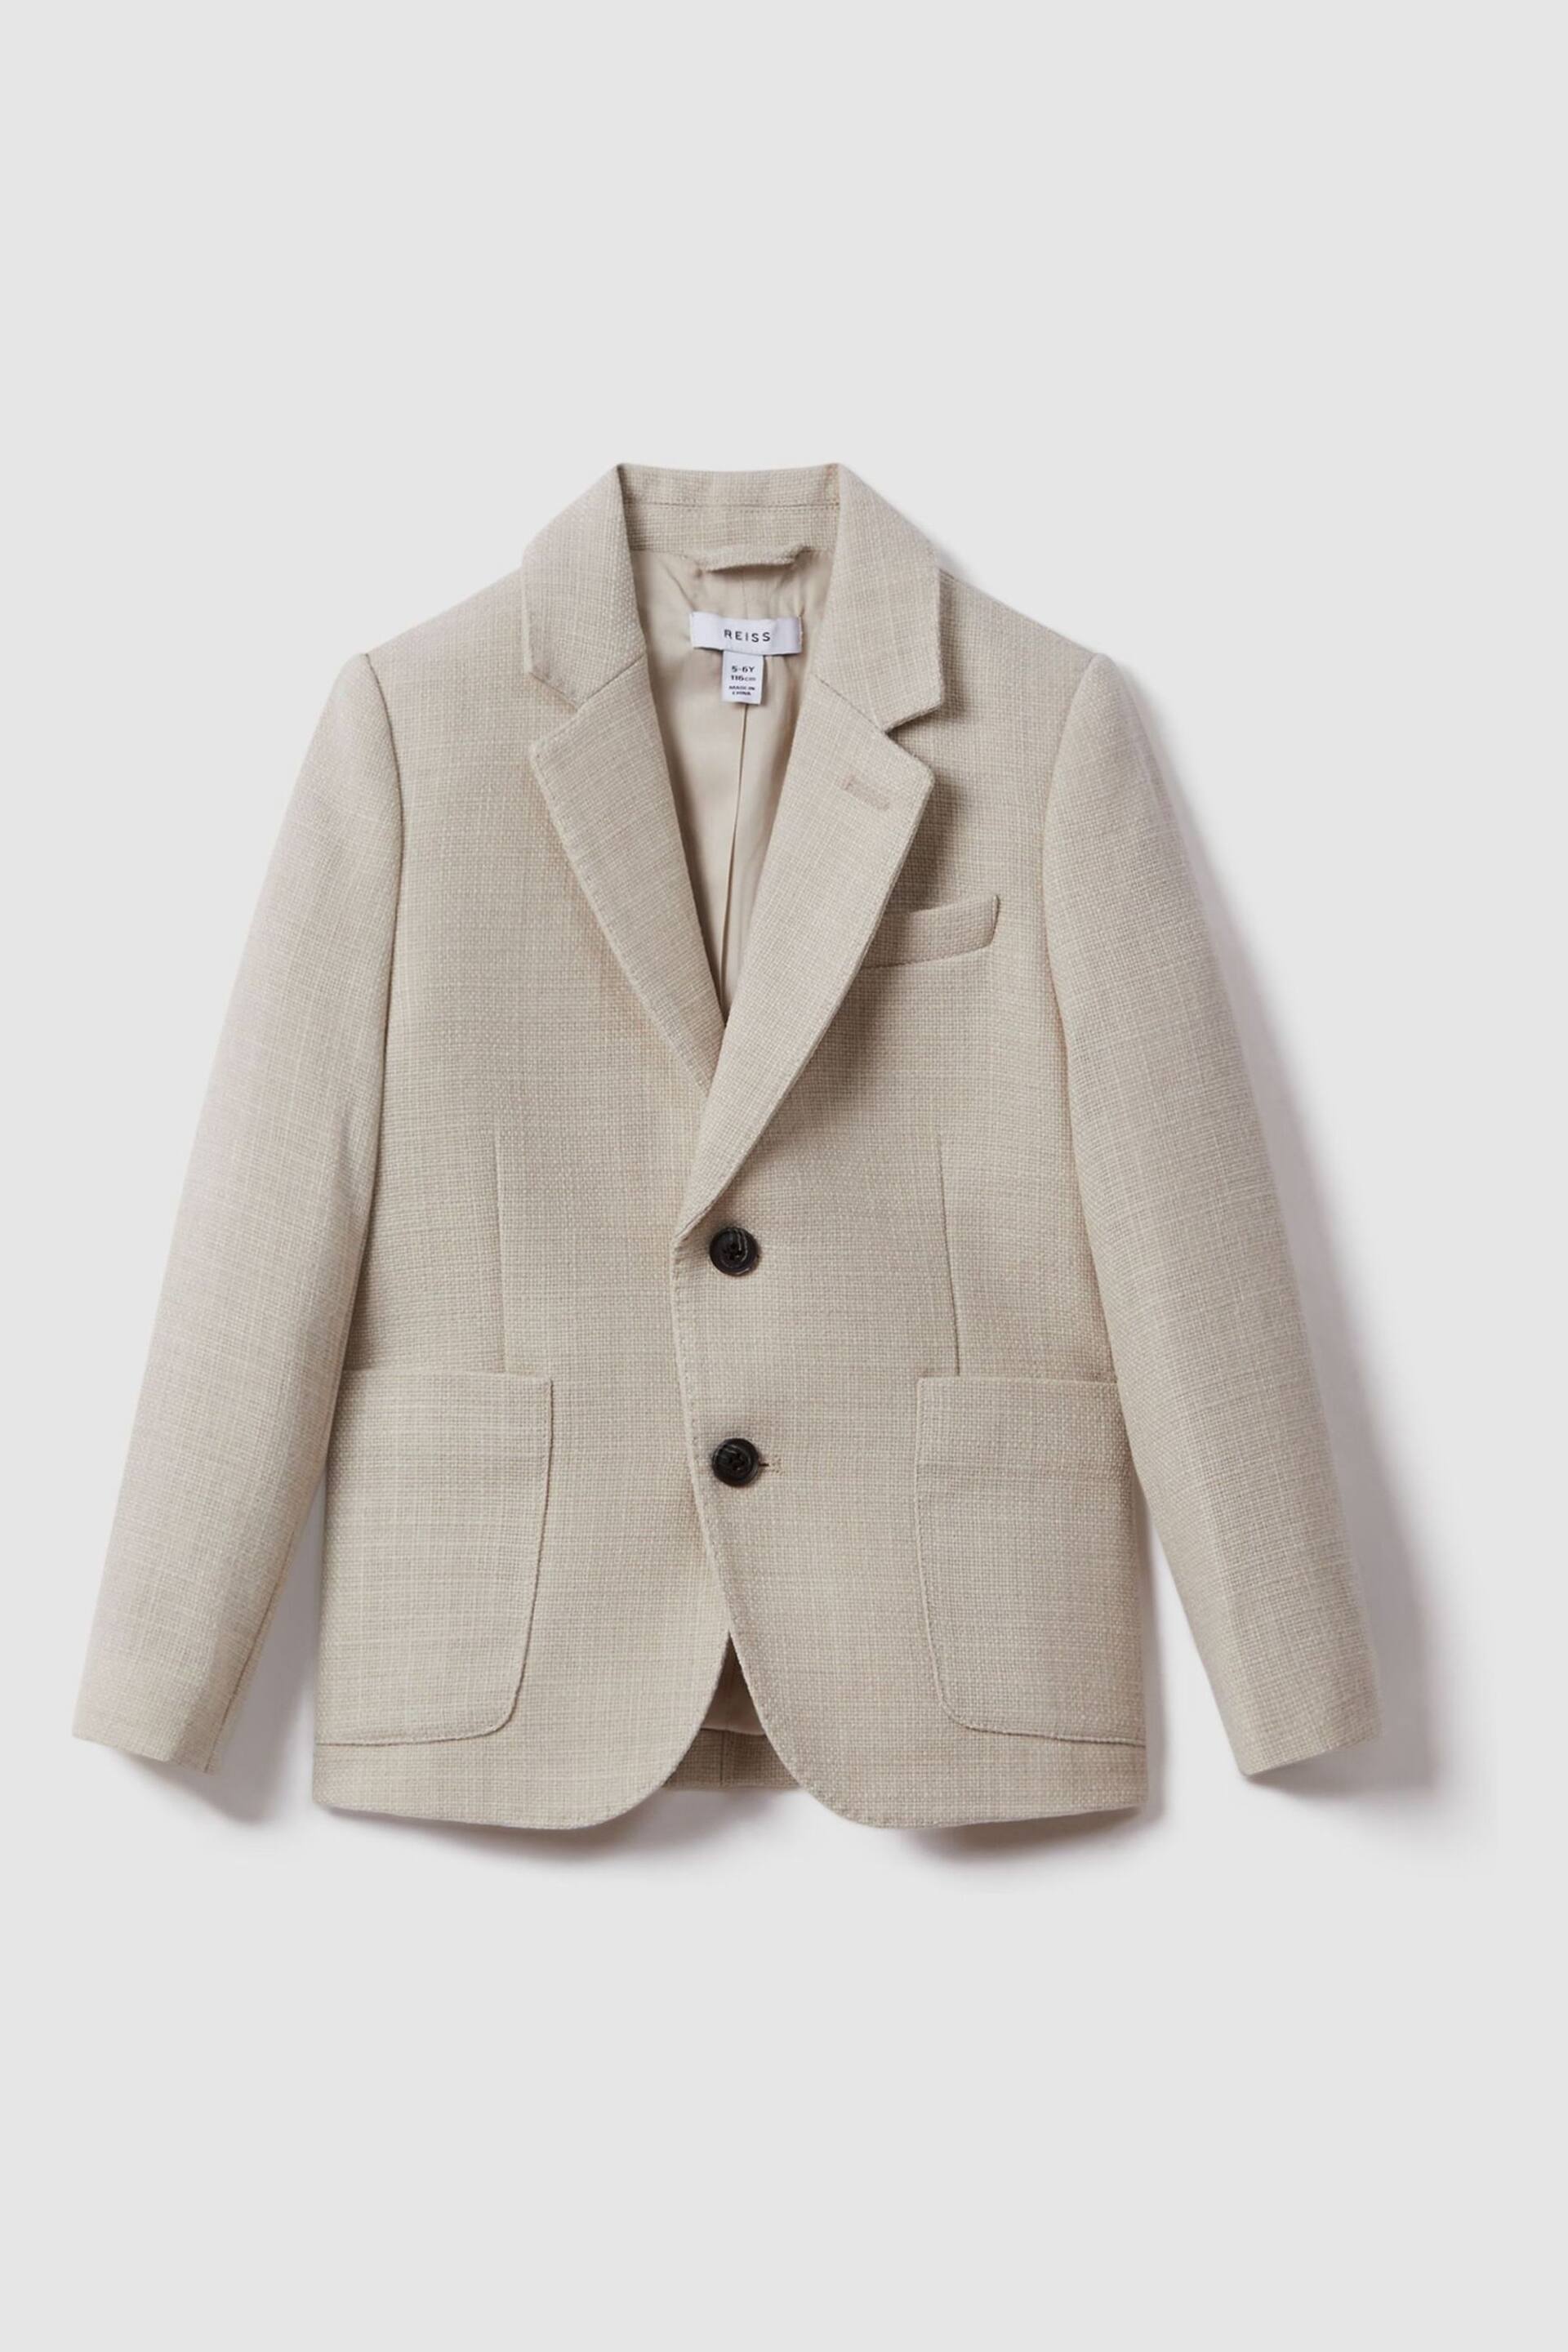 Reiss Stone Attire Teen Textured Wool Blend Single Breasted Blazer - Image 1 of 4